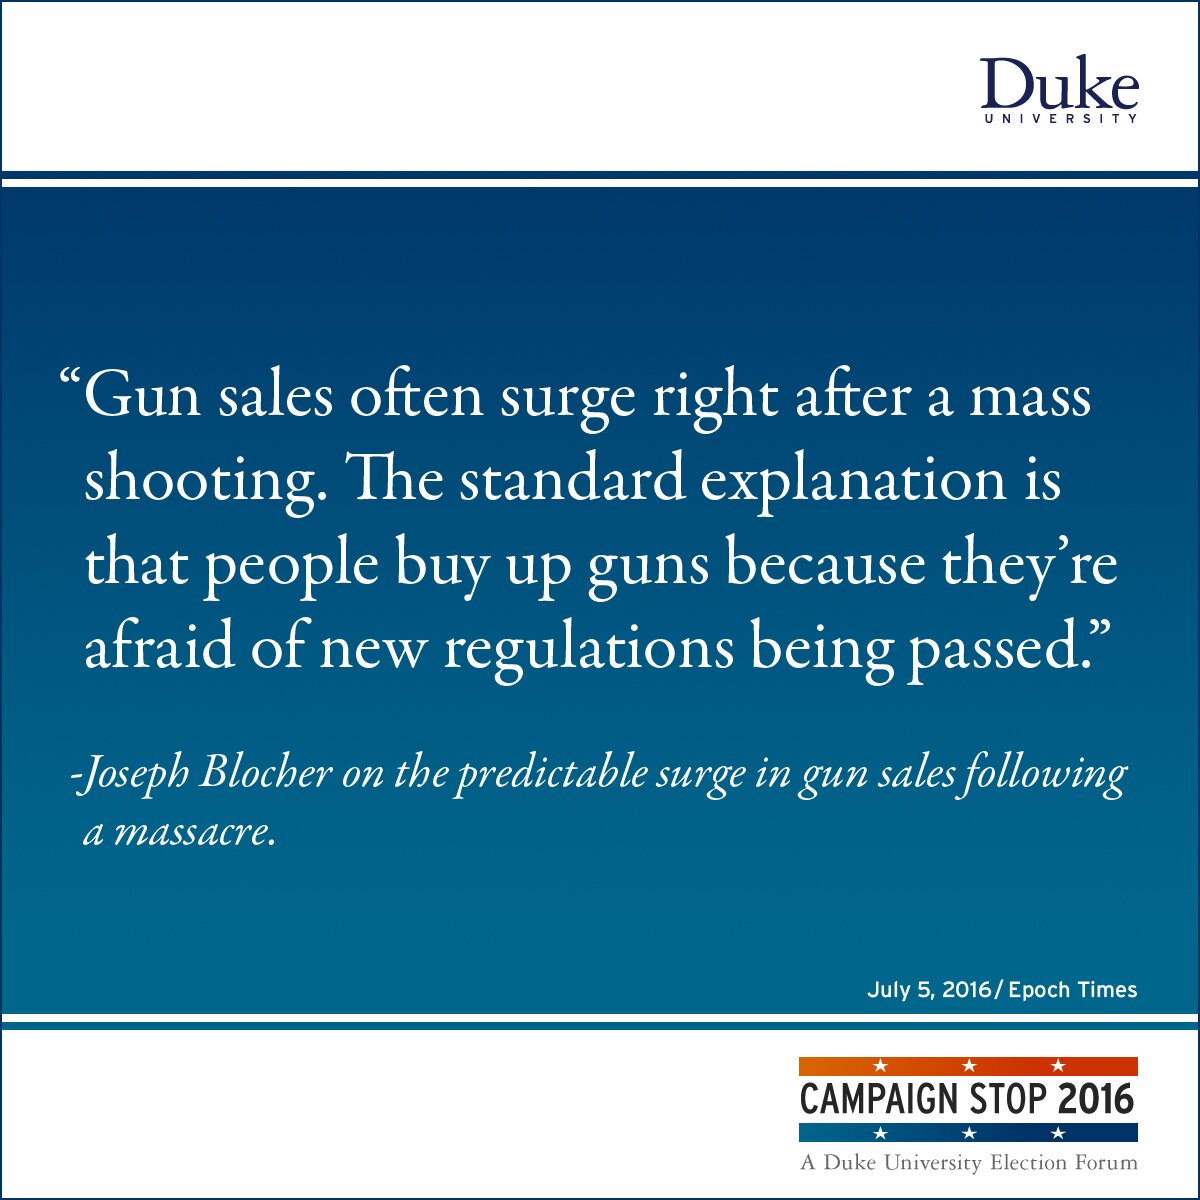 “Gun sales often surge right after a mass shooting. The standard explanation is that people buy up guns because they’re afraid of new regulations being passed.” -Joseph Blocher on the predictable surge in gun sales following a massacre.